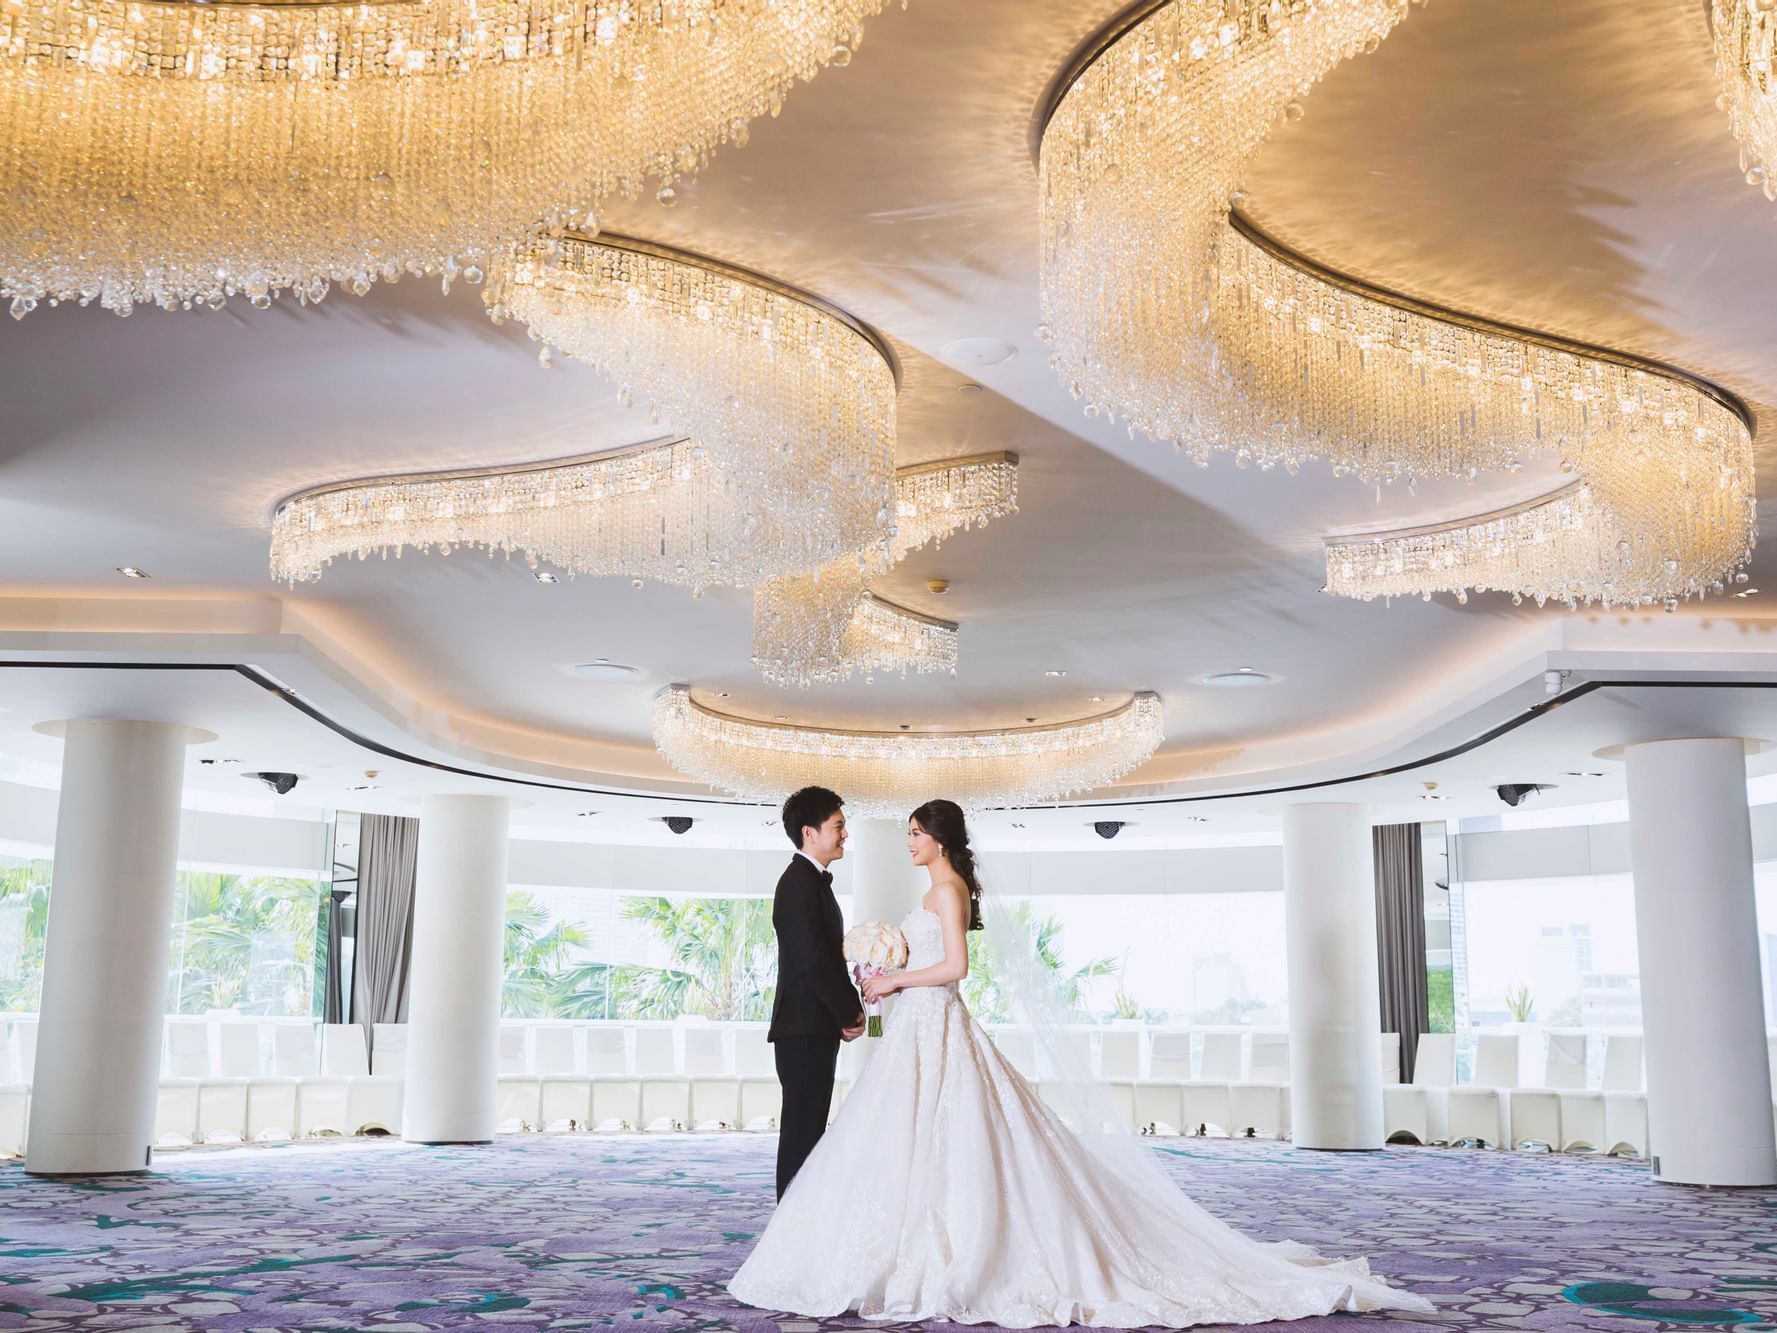 Bride & Groom in an event hall at Chatrium Hotels & Residences